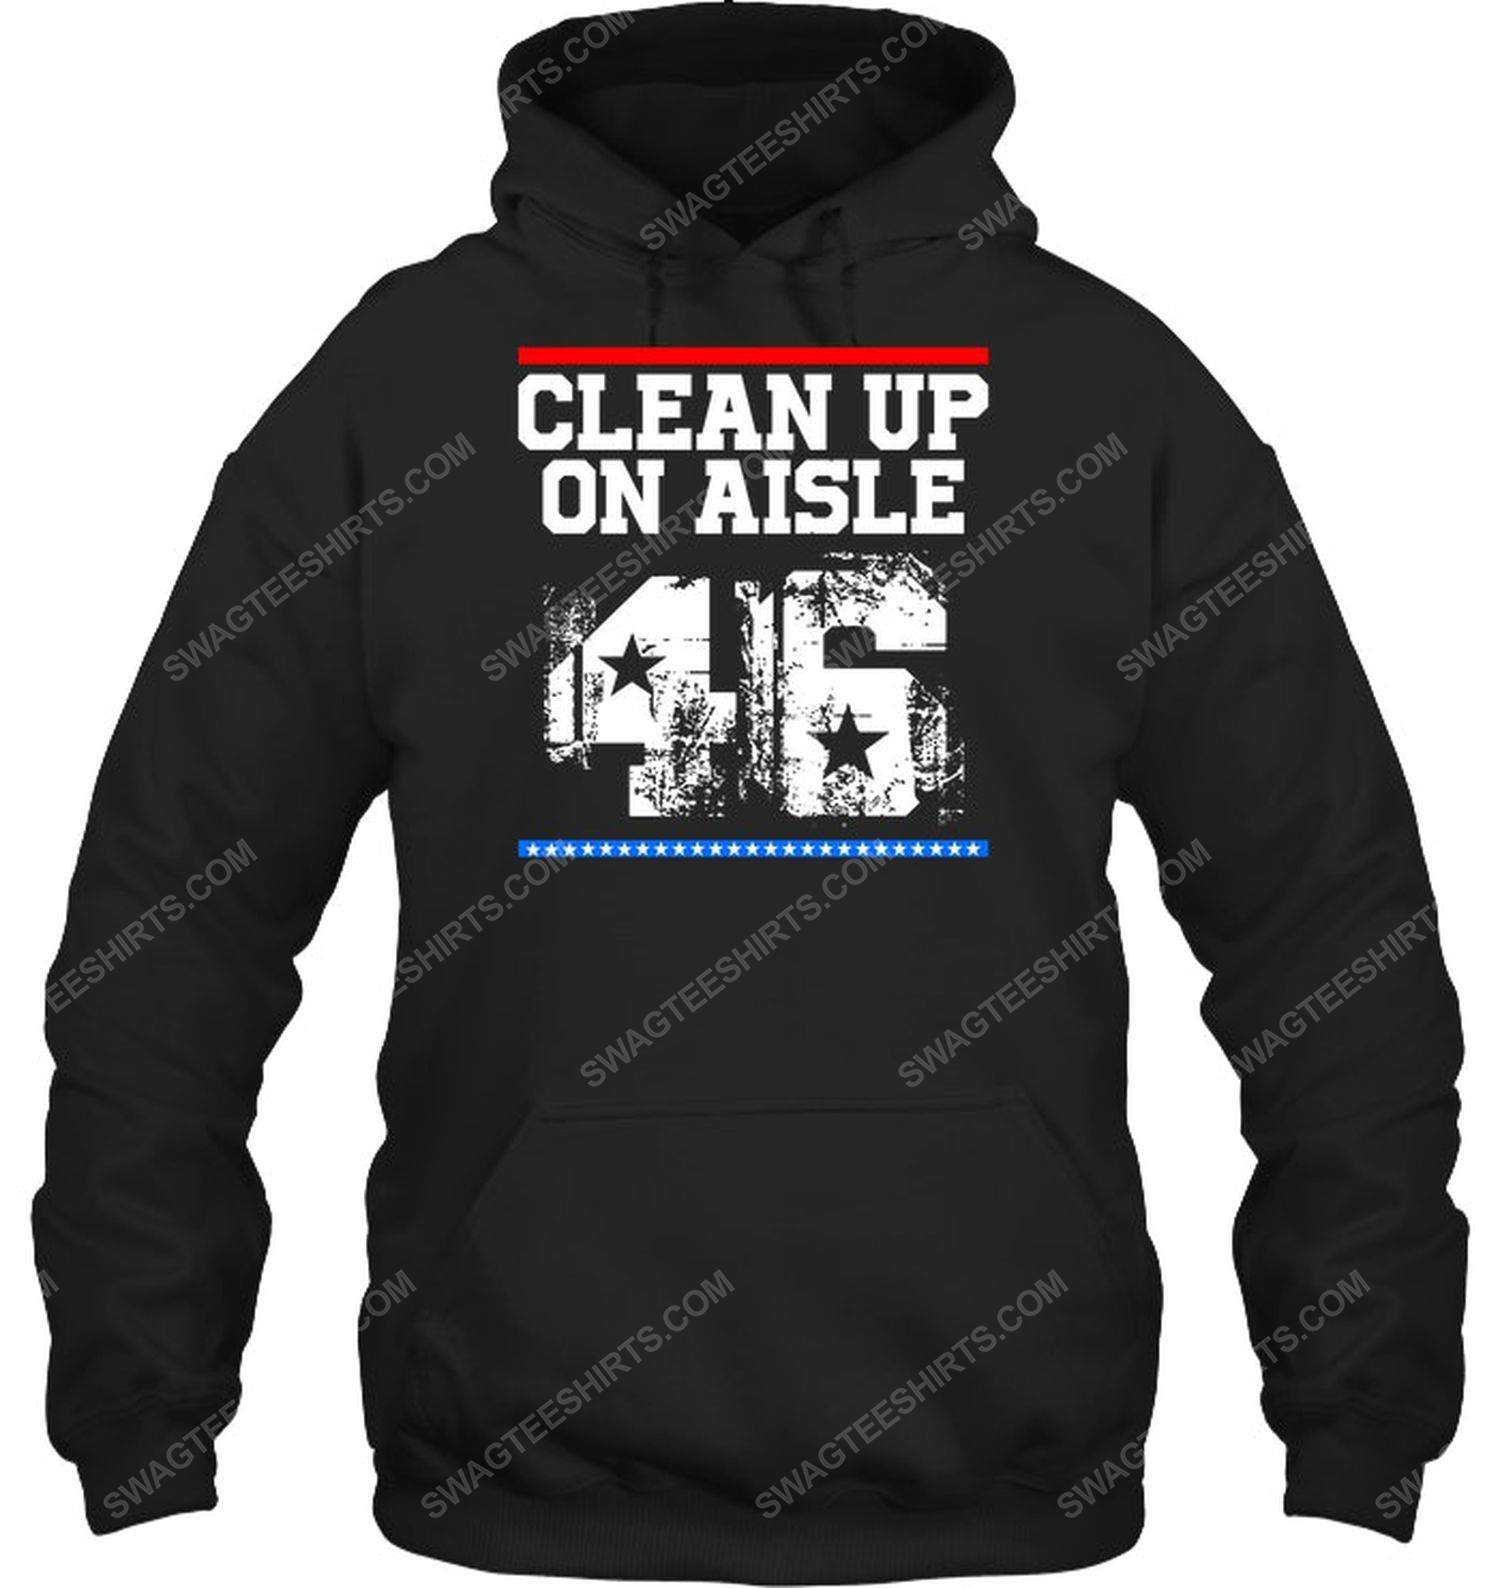 Clean up on aisle 46 political hoodie